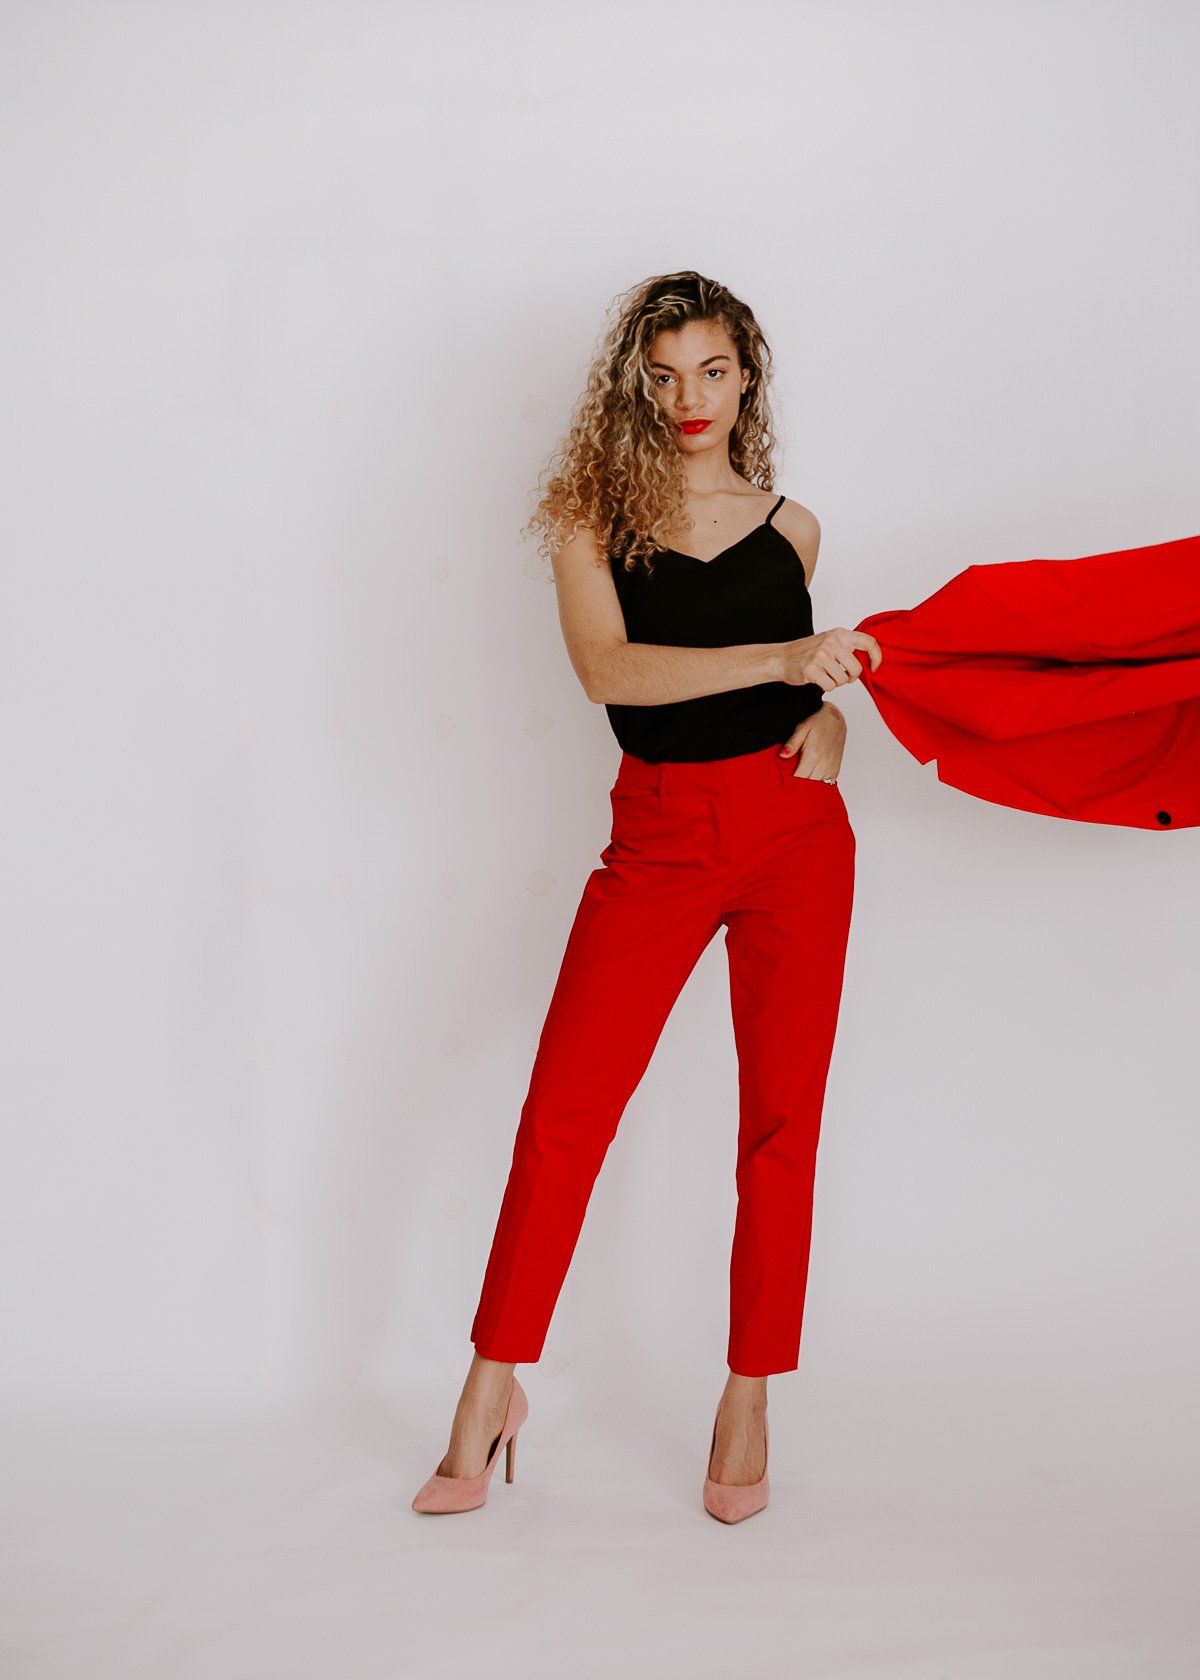 Red and pink outfits that are perfect for Valentine's Day or wearing them for spring. These colors together are great spring outfit ideas too! This red suit set is also trending.